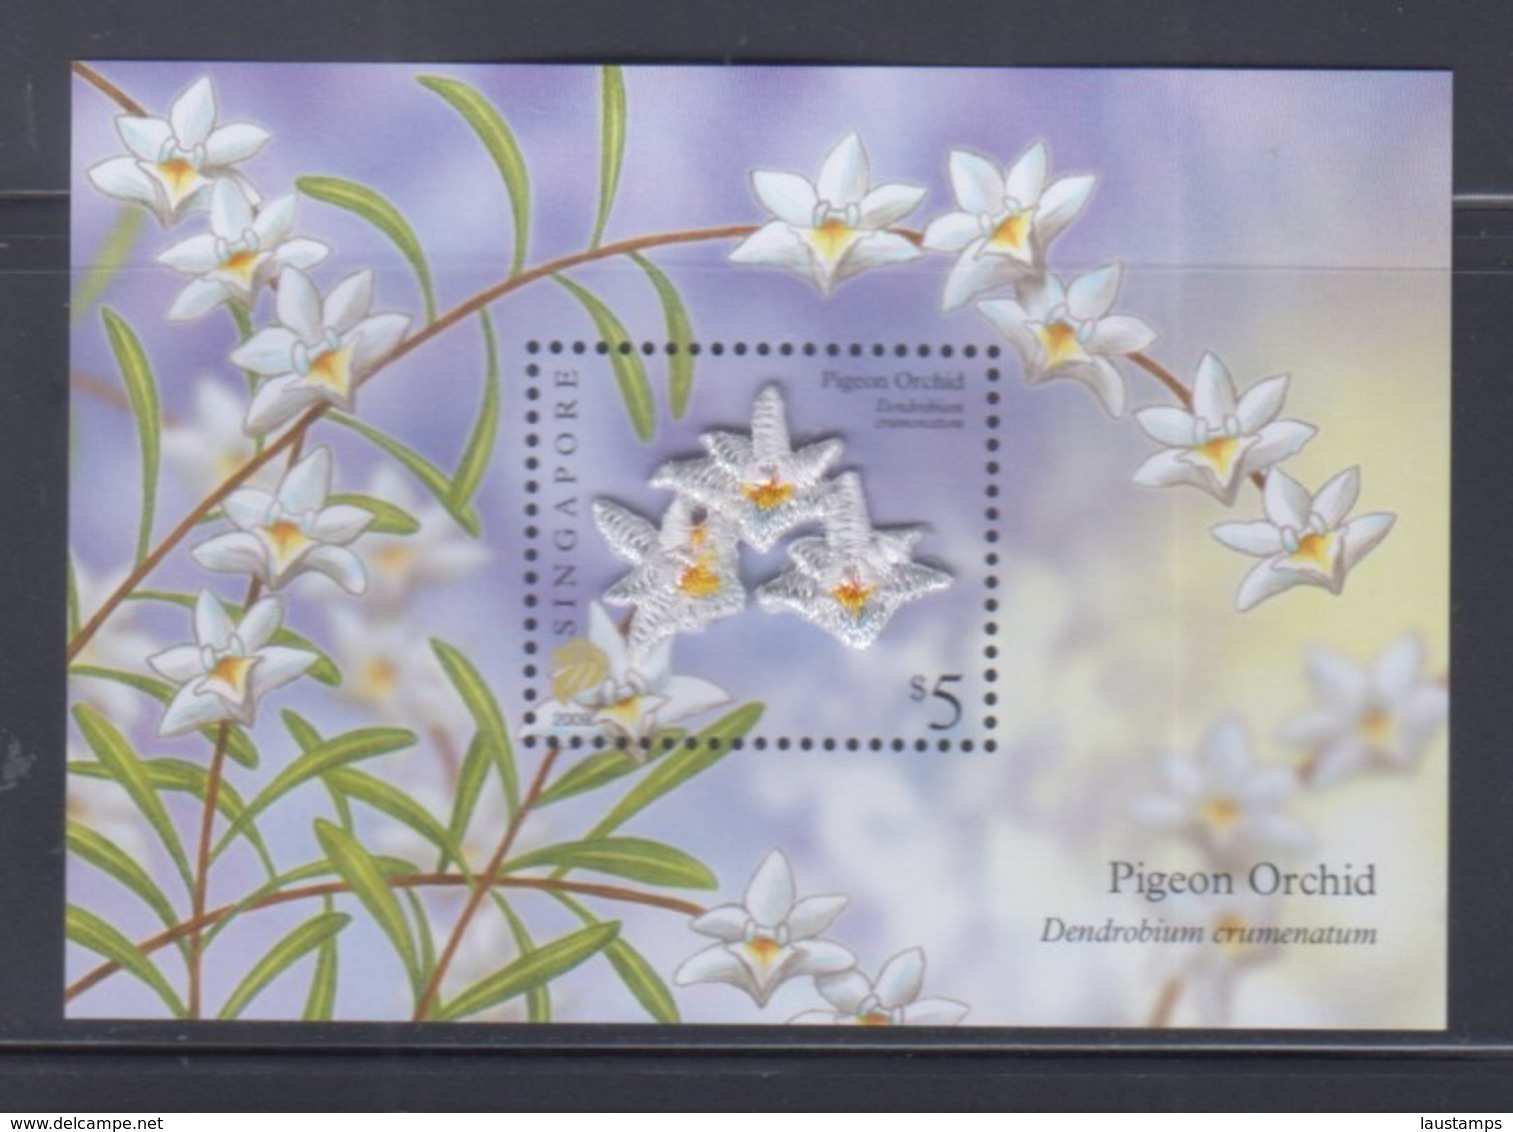 Singapore 2009 Pigeon Orchid With Embroidery, Unusual Collector Sheet MNH - Singapore (1959-...)